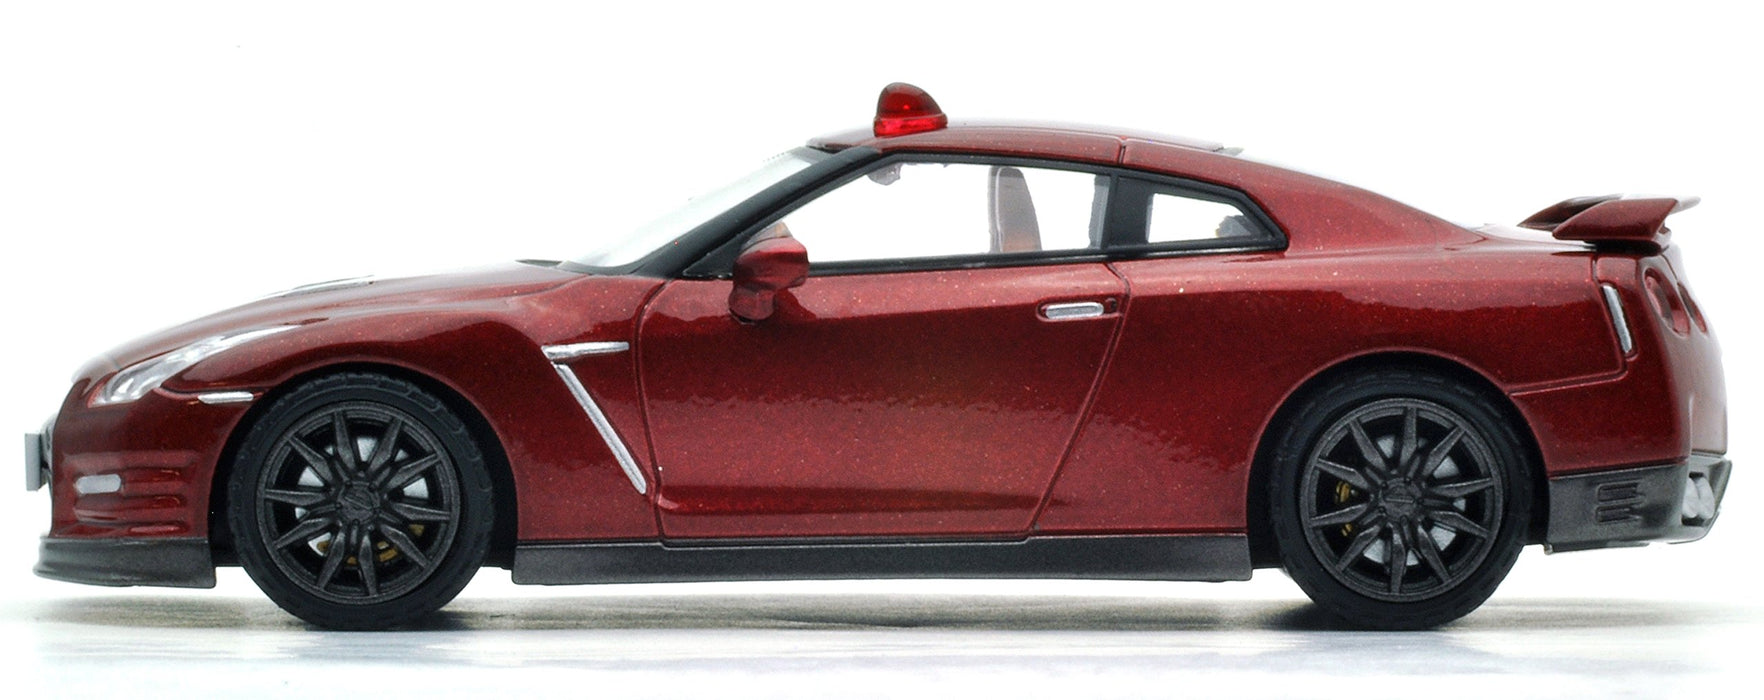 Tomytec 2014 Nissan GT-R in Rot Tomica Limited Vintage Neo Dangerous Detective